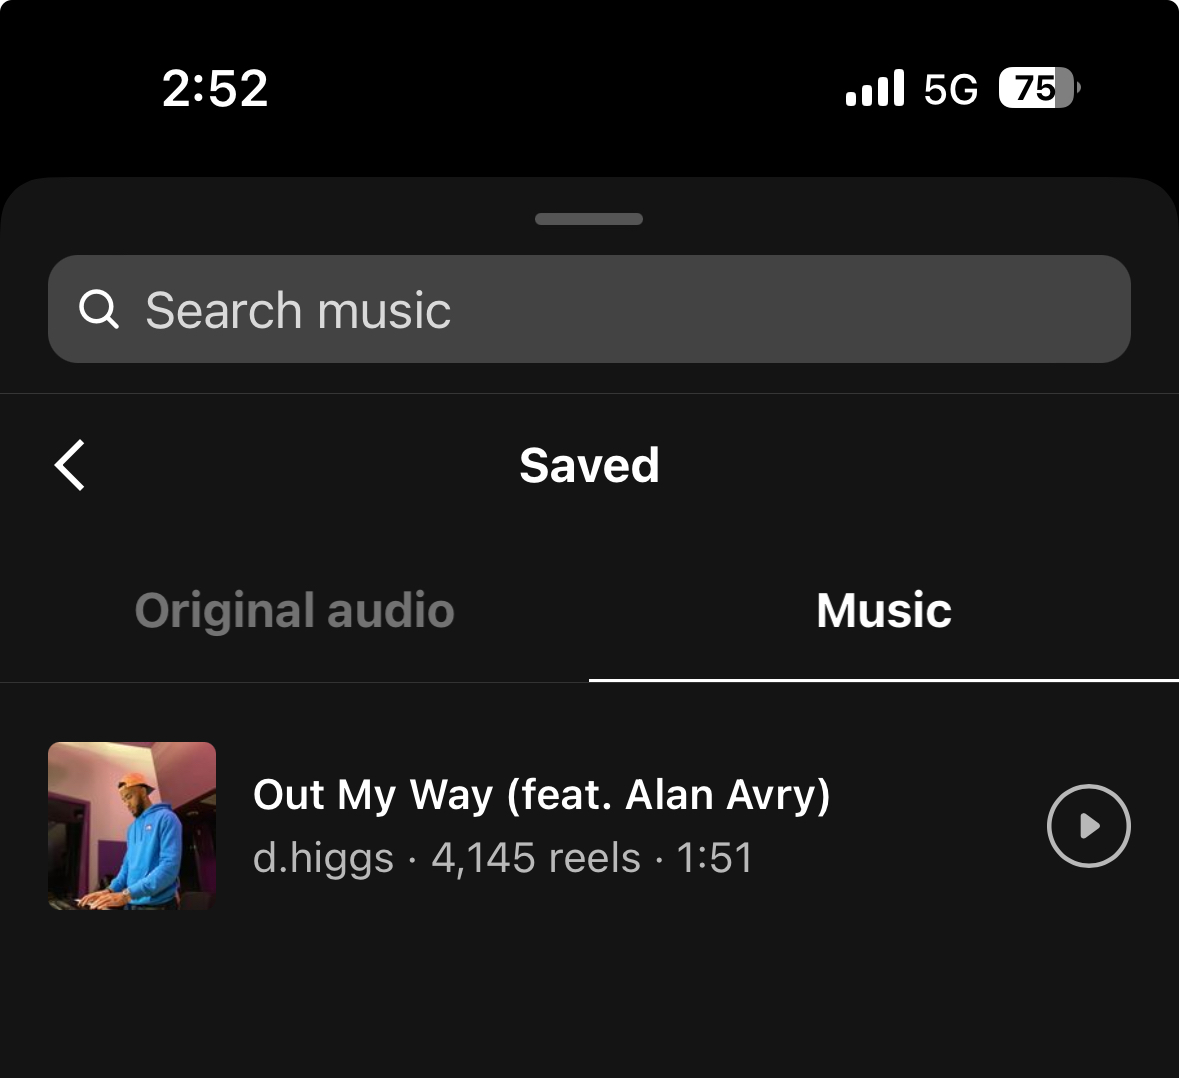 How to Save Music and Use the "Saved Music" Feature on Instagram 11